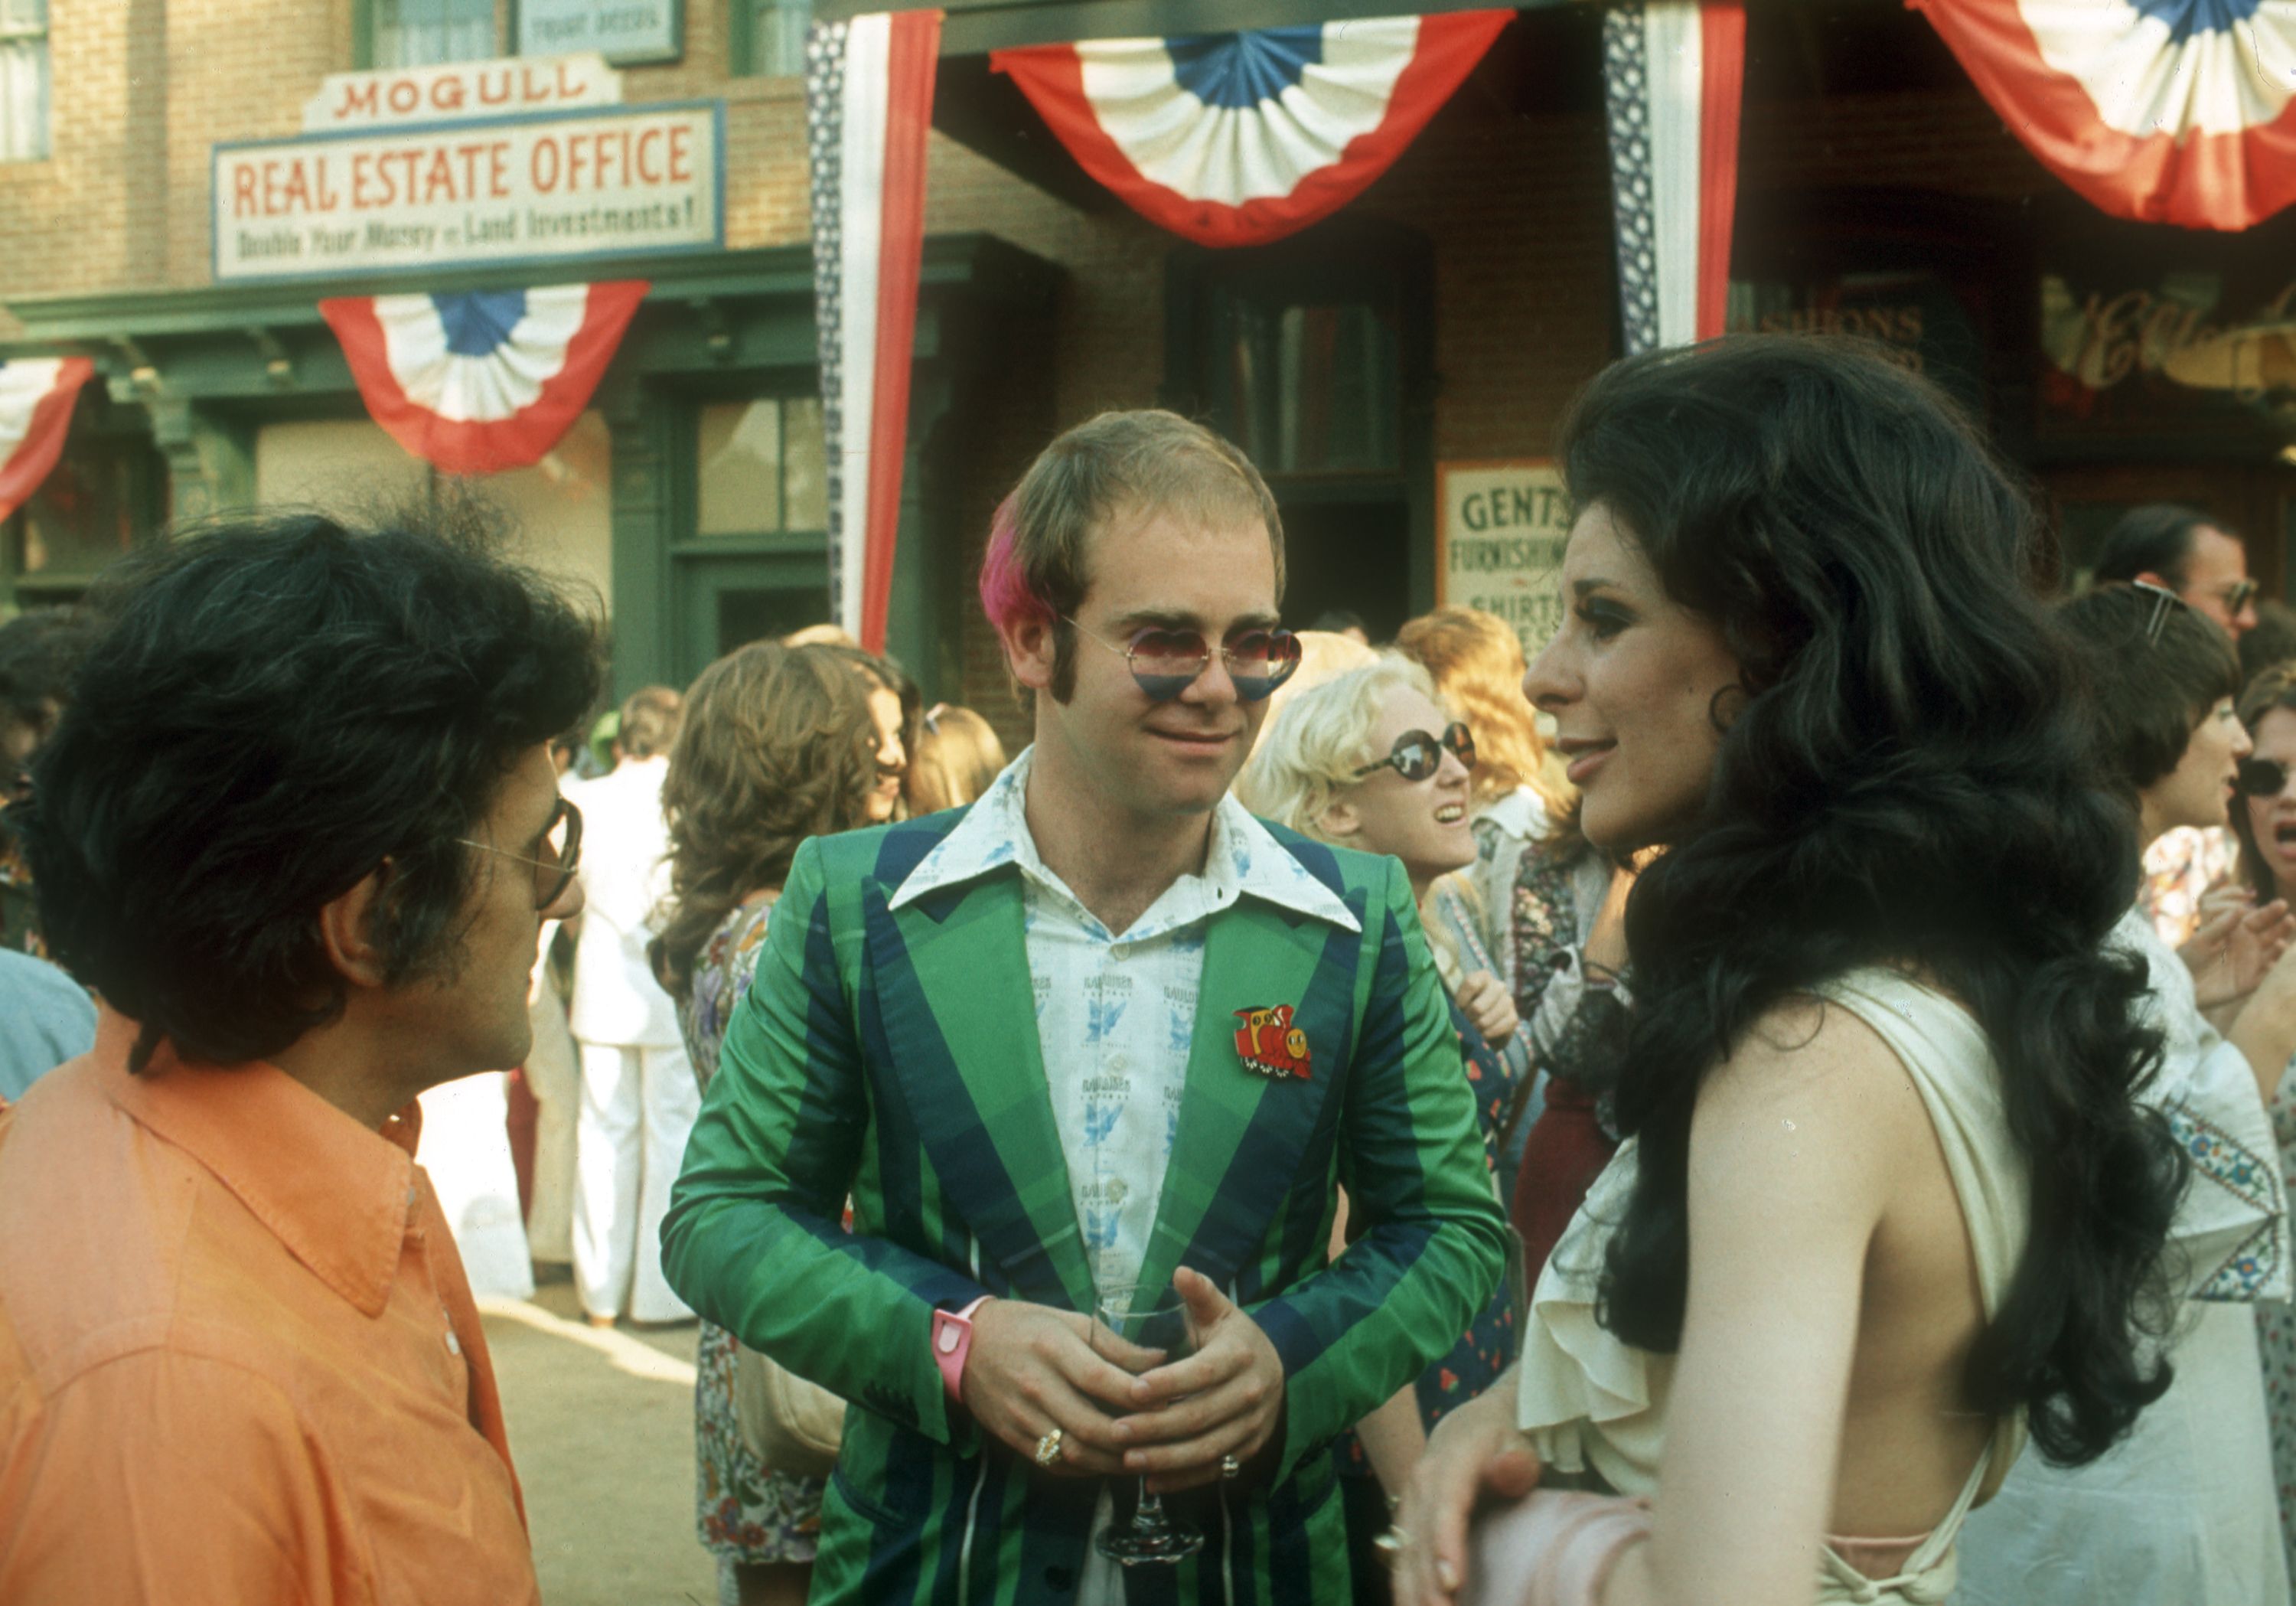 Elton John Presents 14 of His Iconic Looks: From 1968 to Now